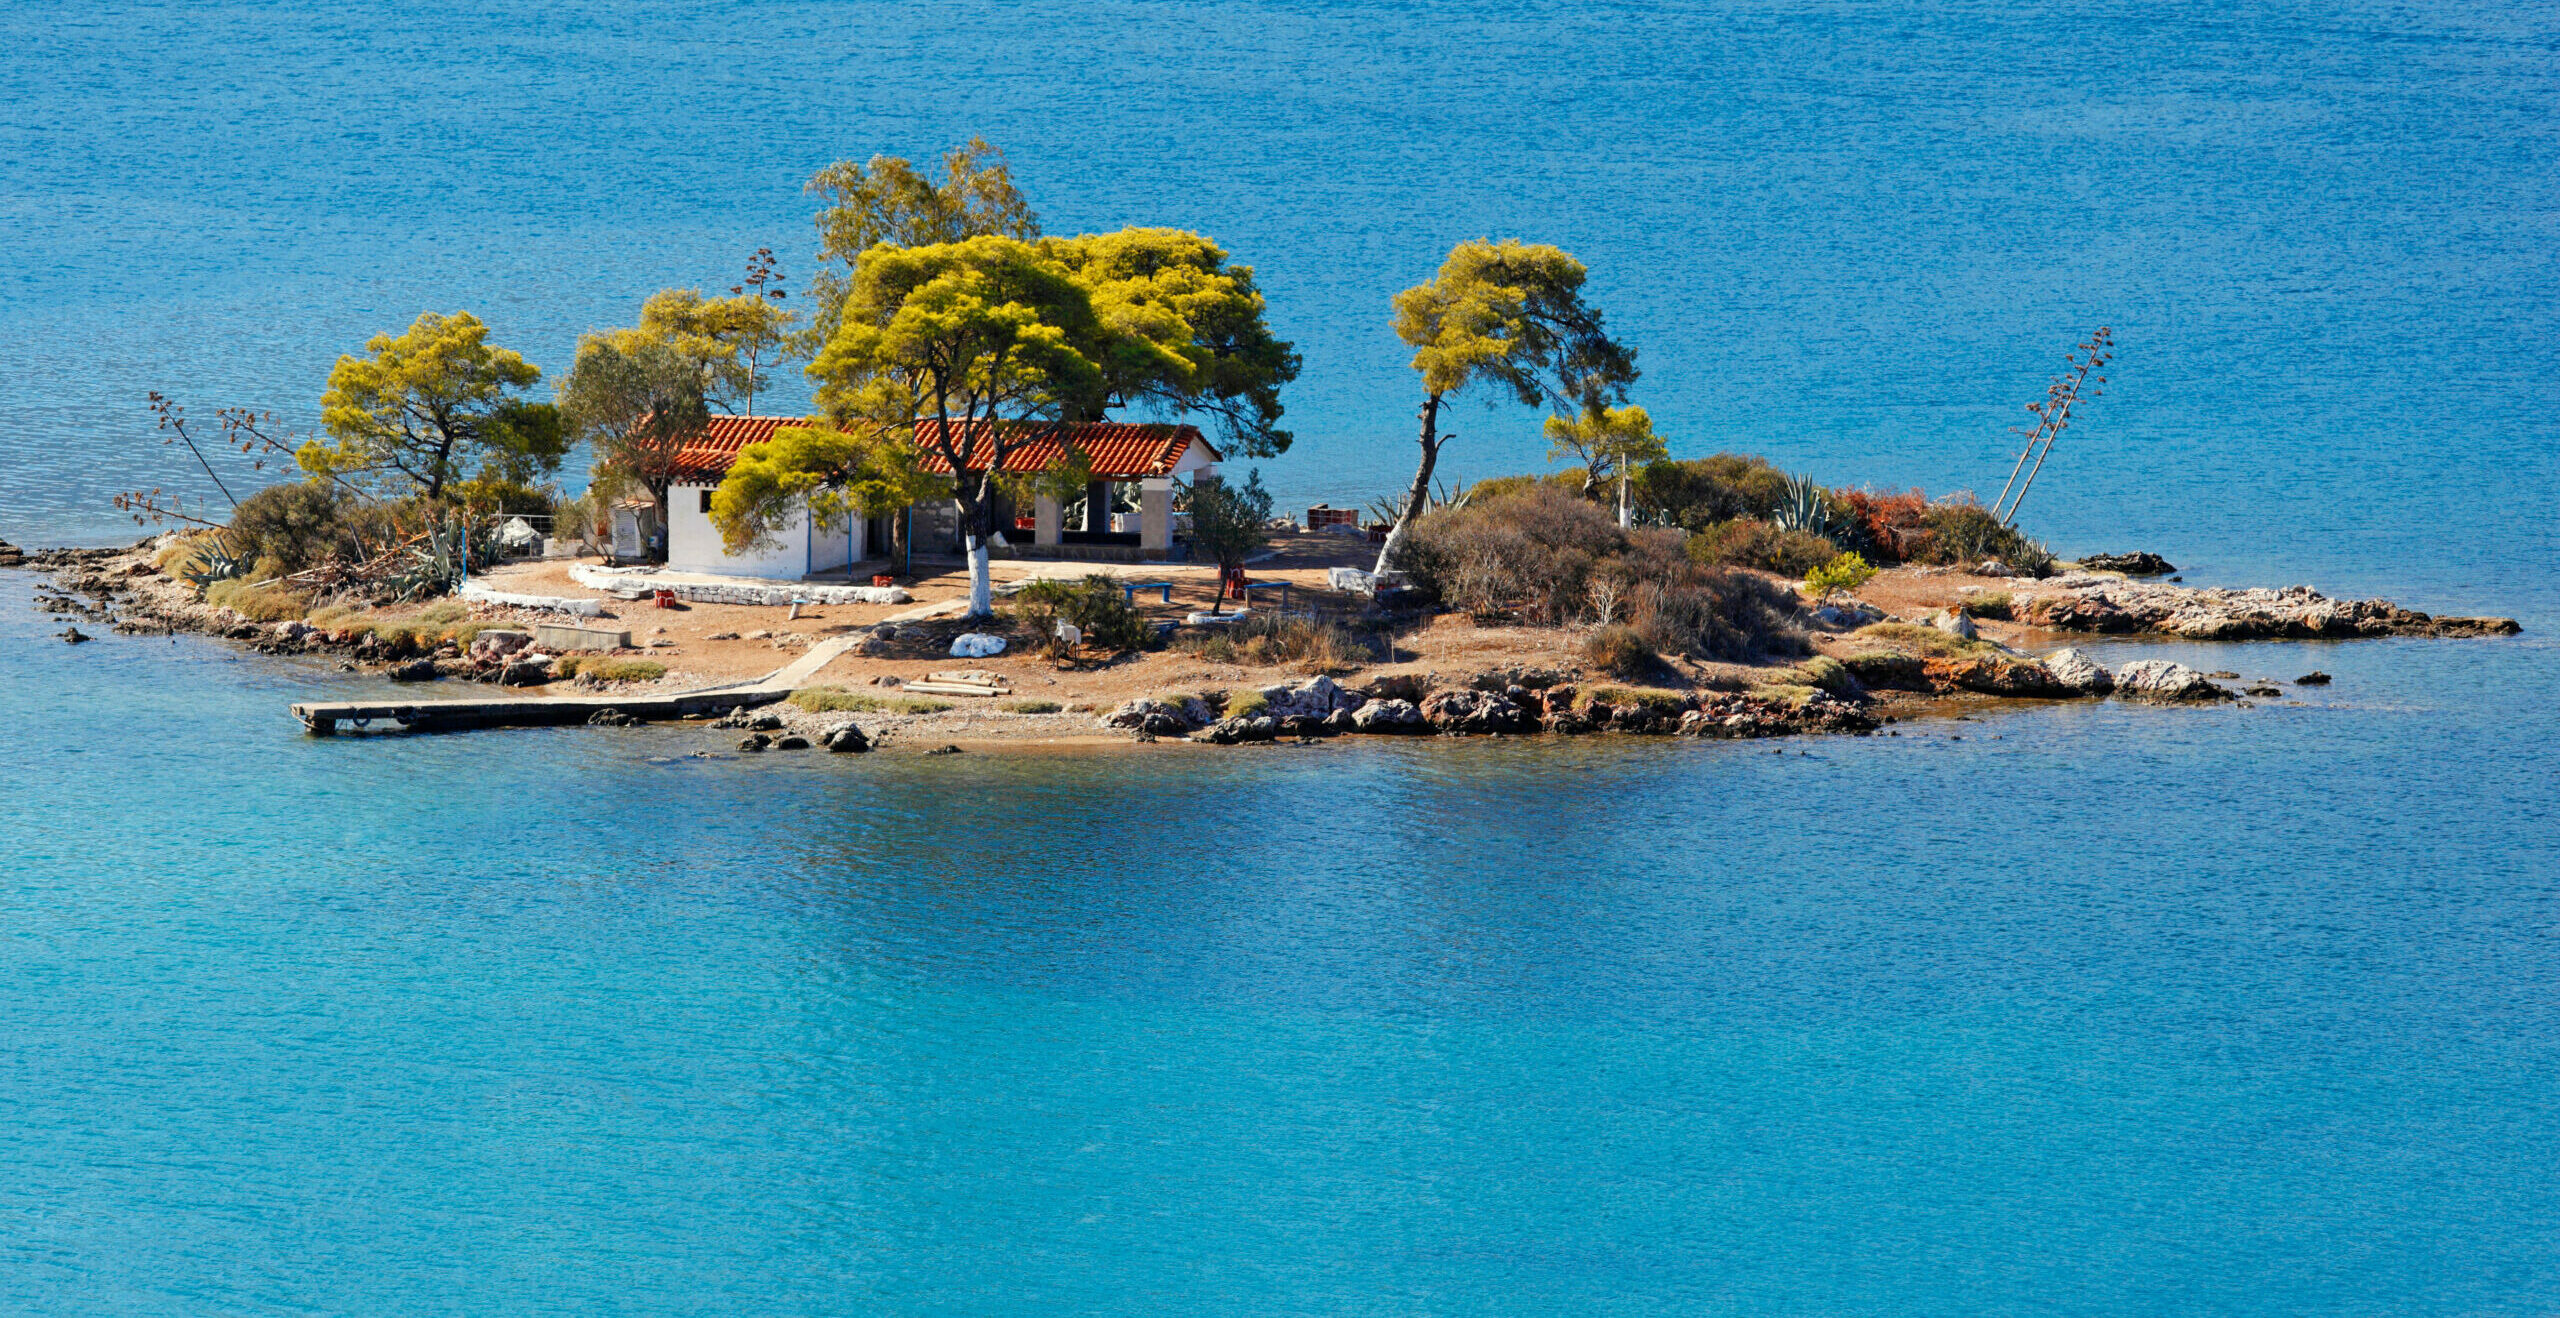 Daskalio: The famous island of love